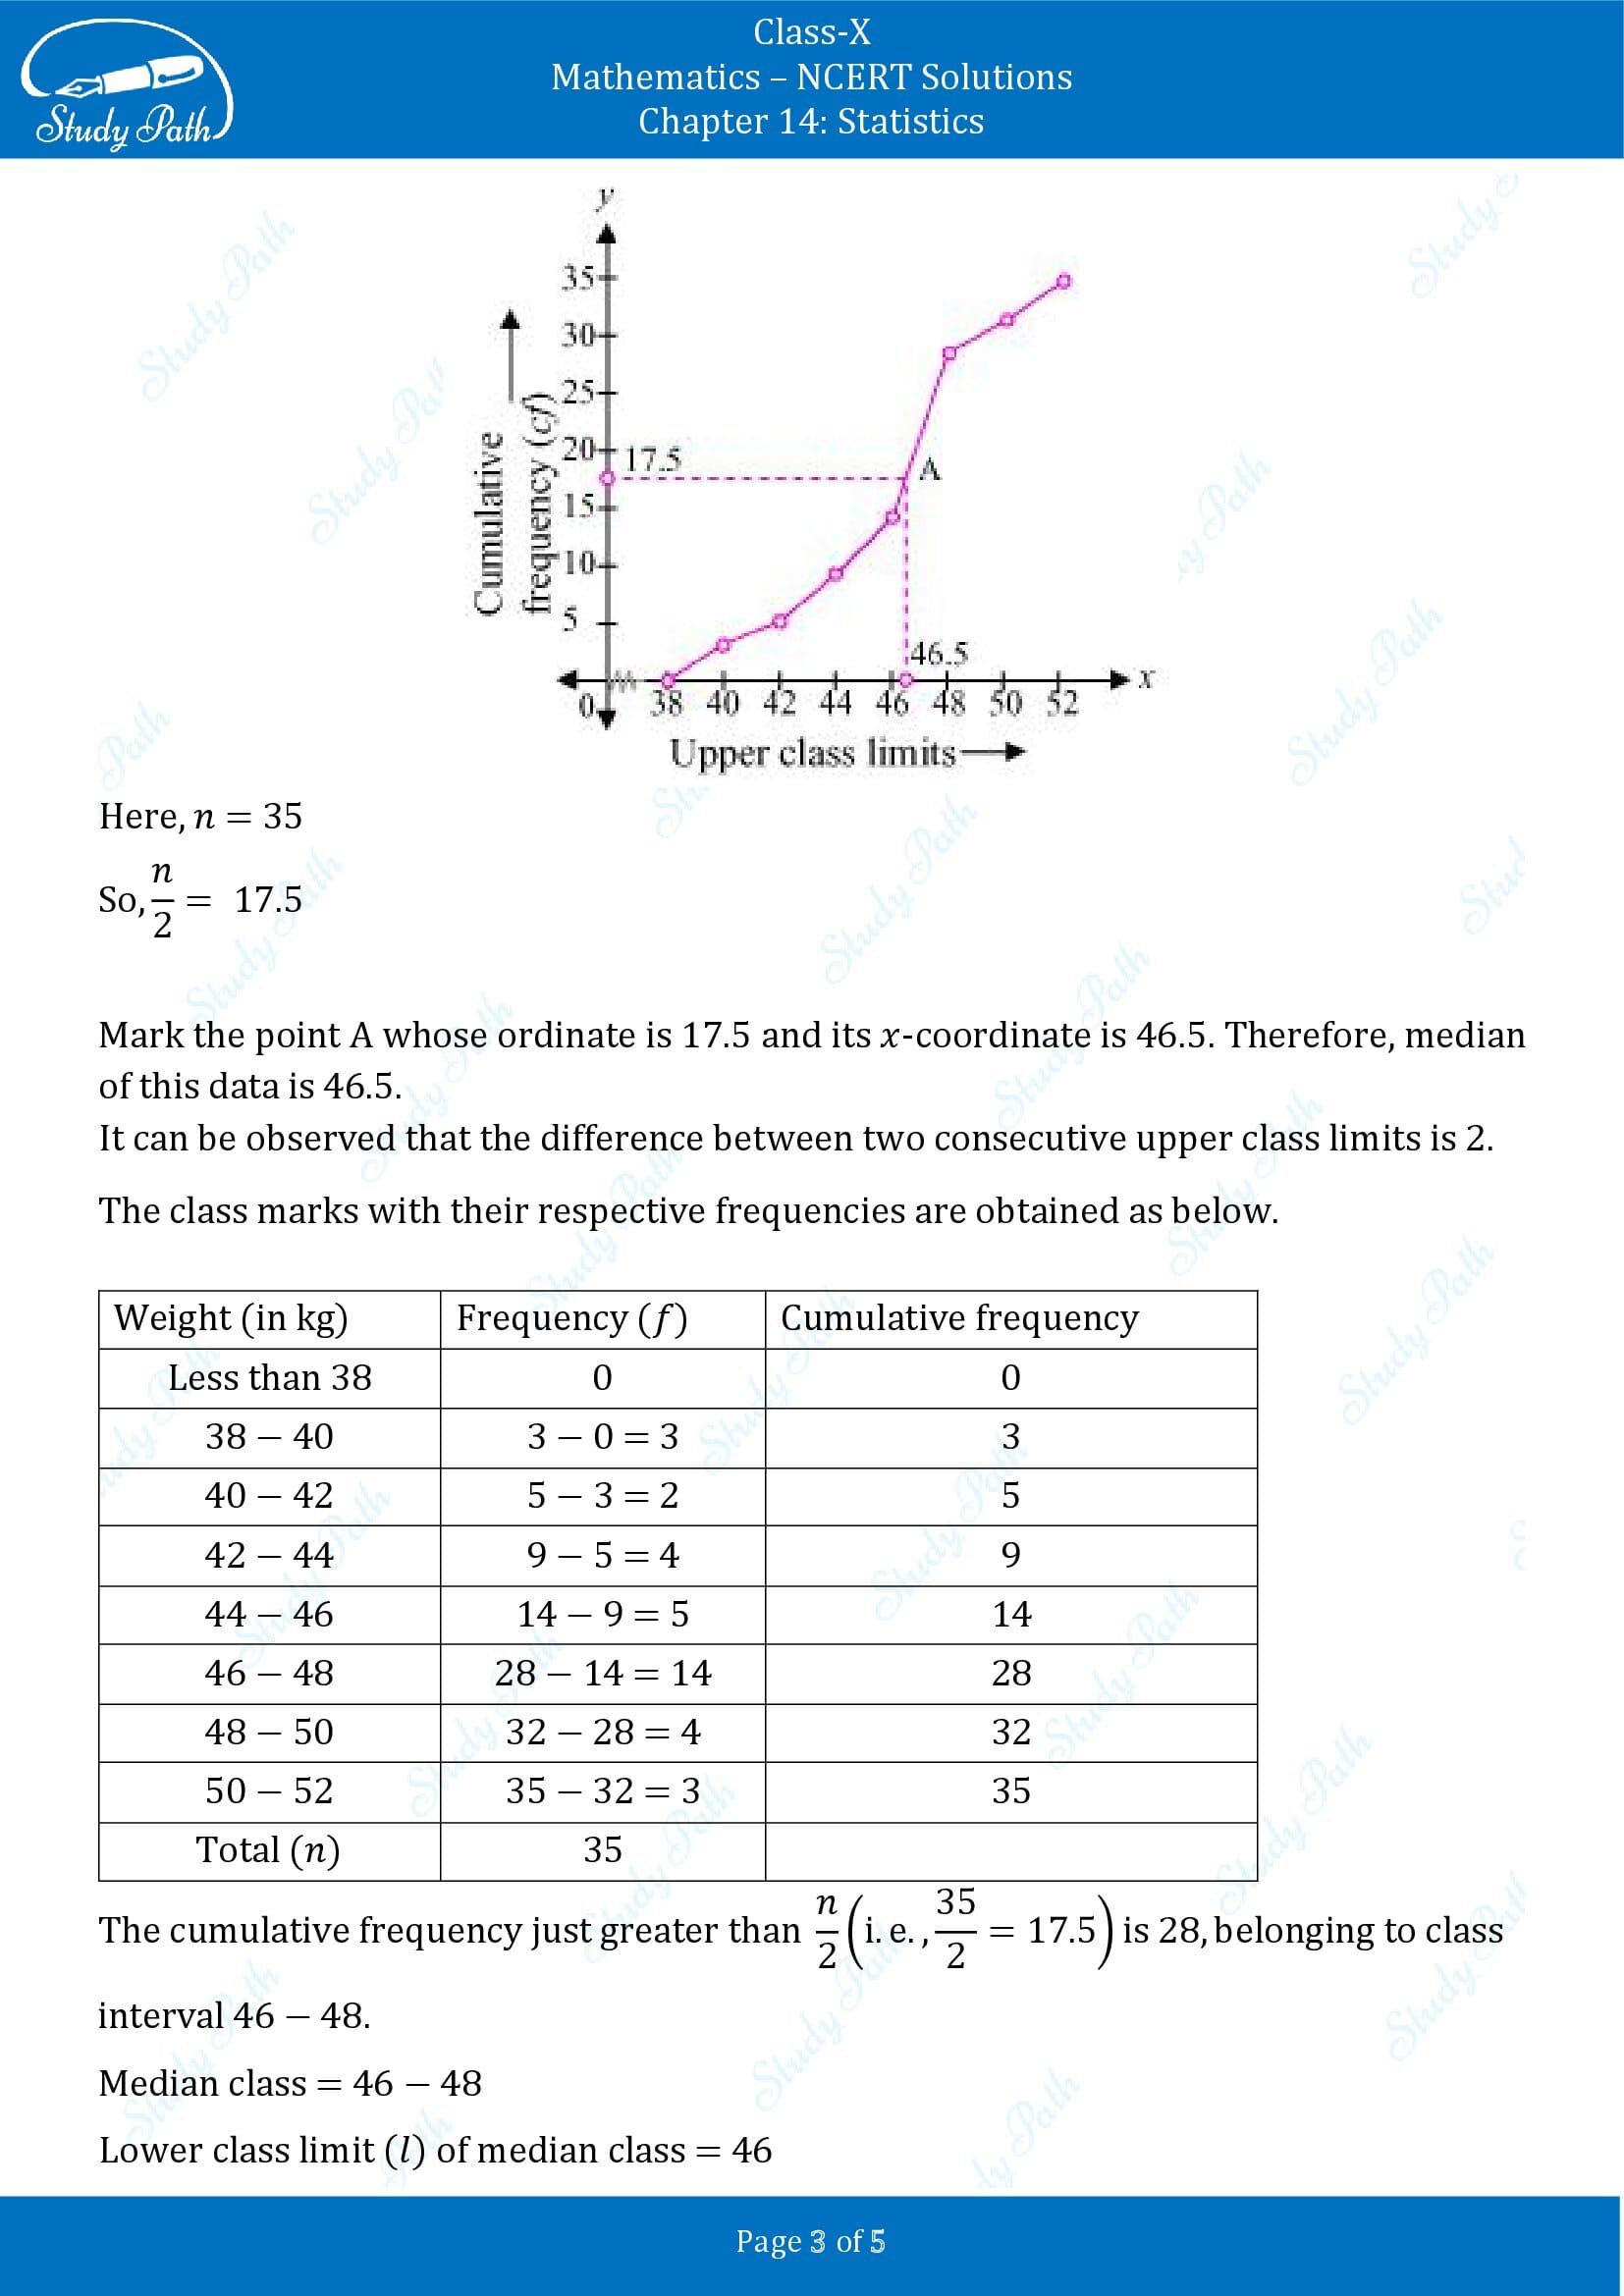 NCERT Solutions for Class 10 Maths Chapter 14 Statistics Exercise 14.4 00003